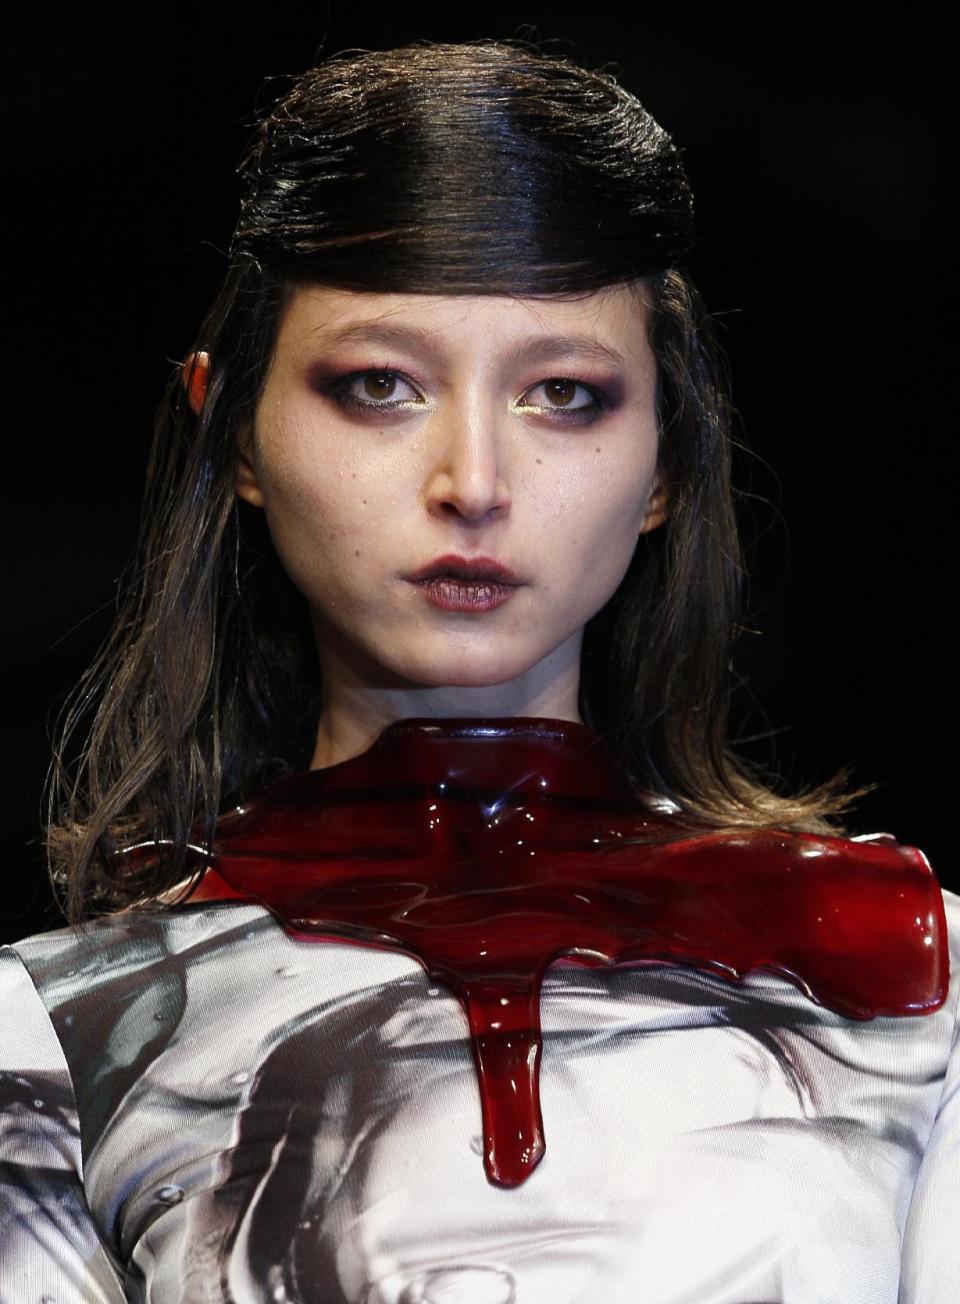 A model displays a creation by designer Aminaka Wilmont during a fashion show at London Fashion Week, Tuesday, Feb. 21, 2012. (AP Photo/Kirsty Wigglesworth)